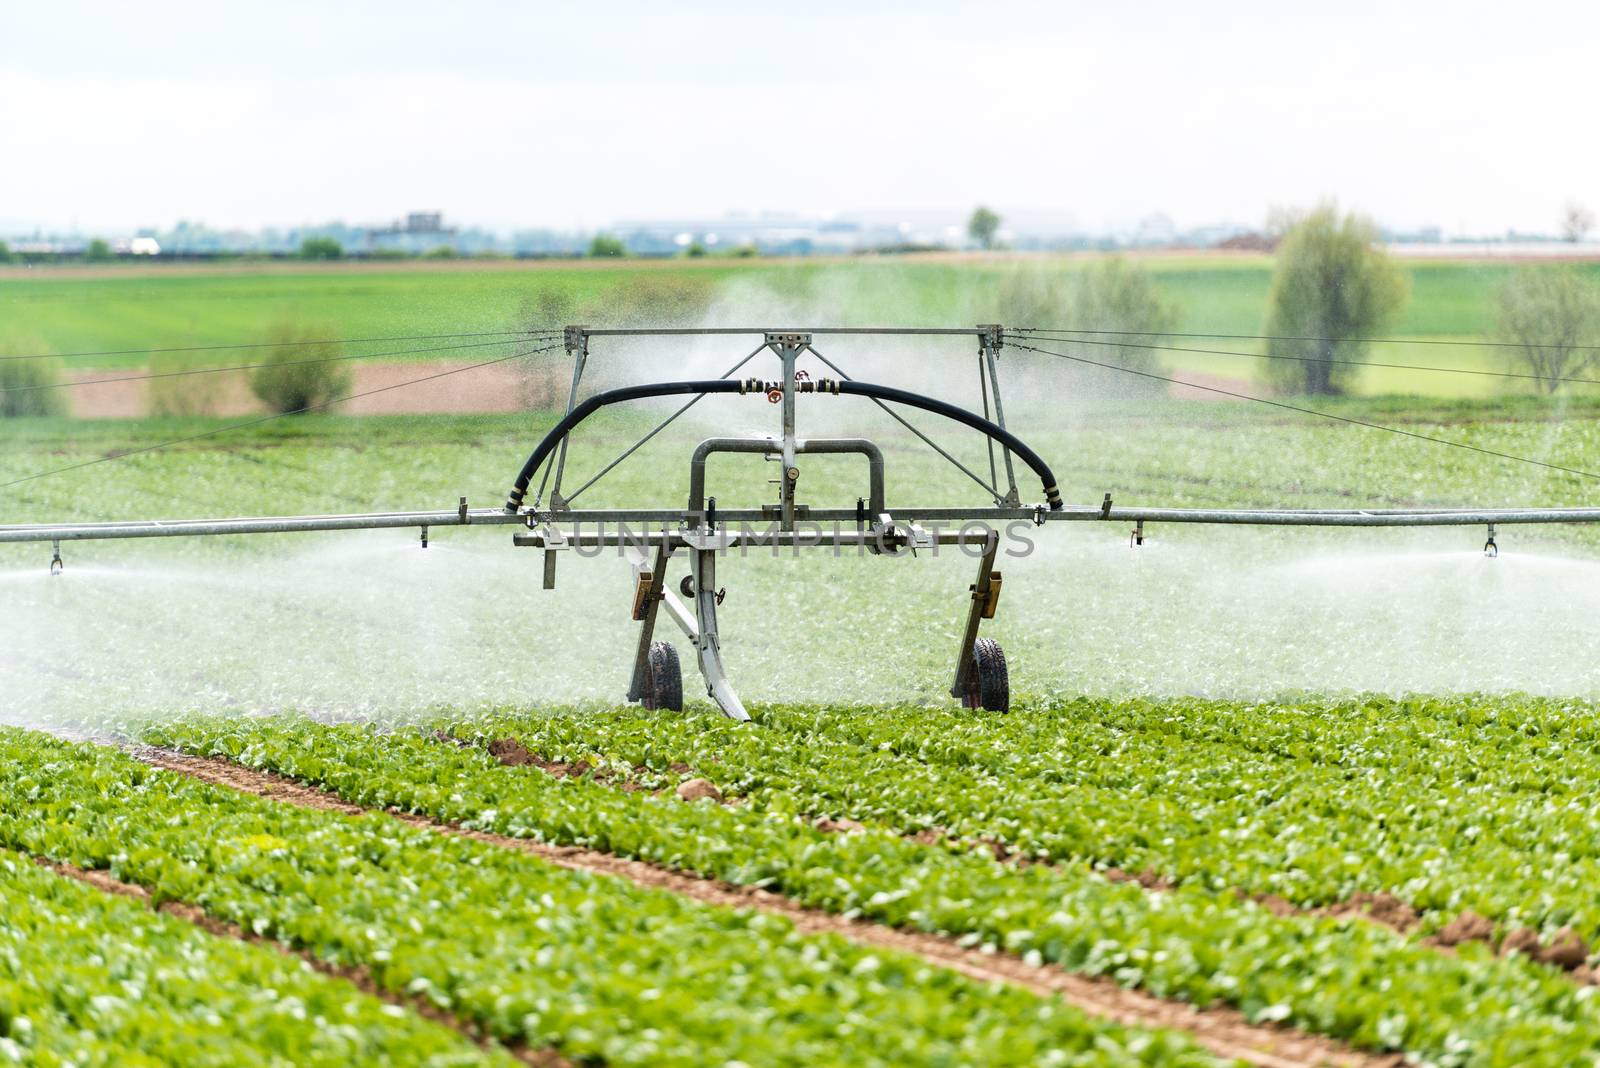 Irrigation system watering a farm field of lettuce in early spring